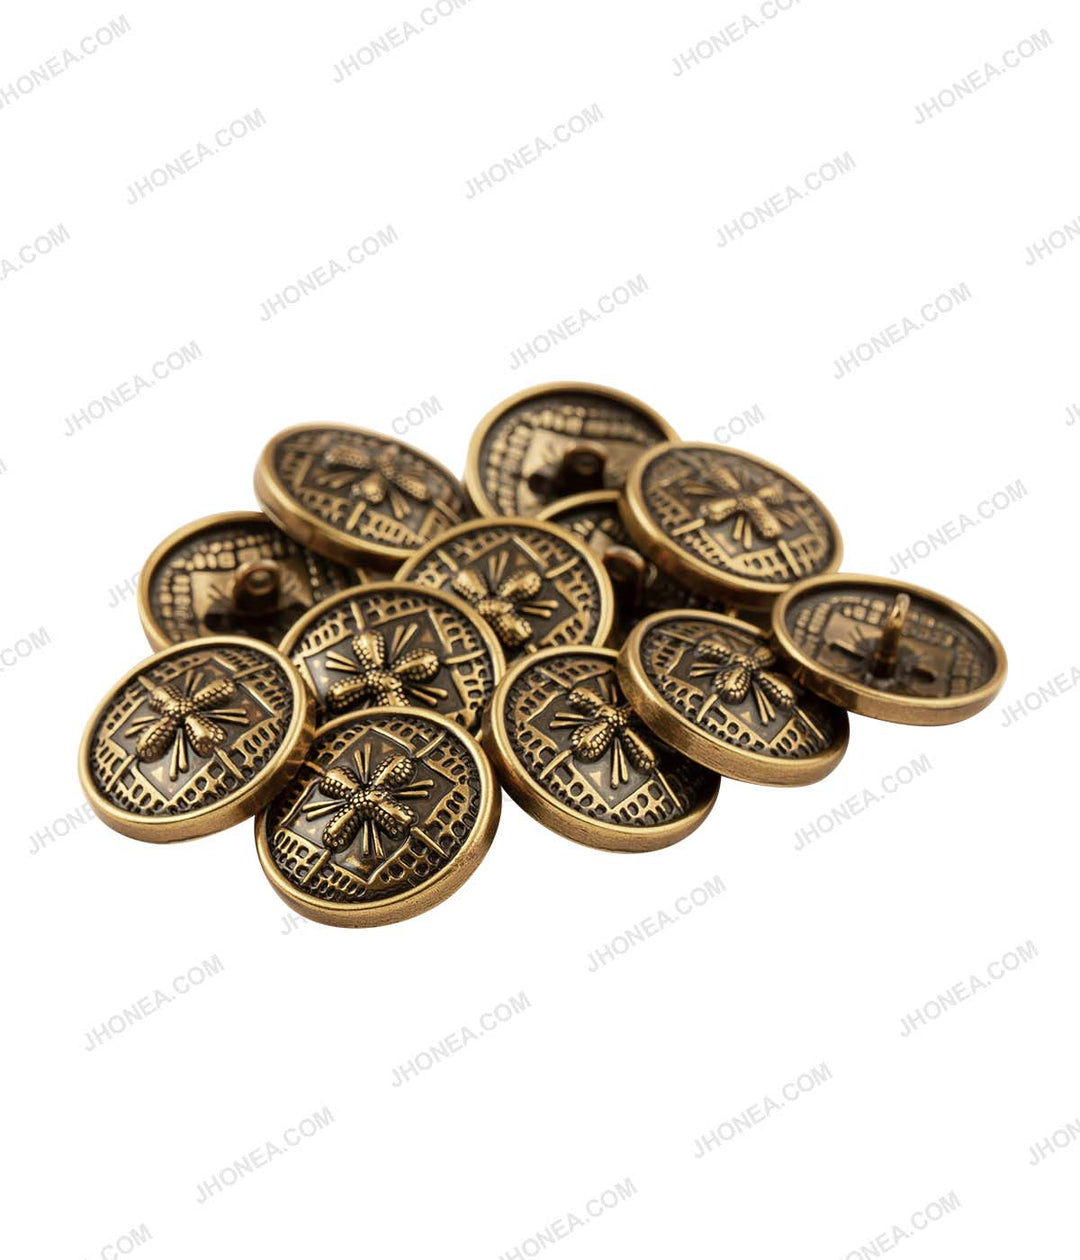 A Raised Detail Vintage Gold Metal Buttons for Long Coats